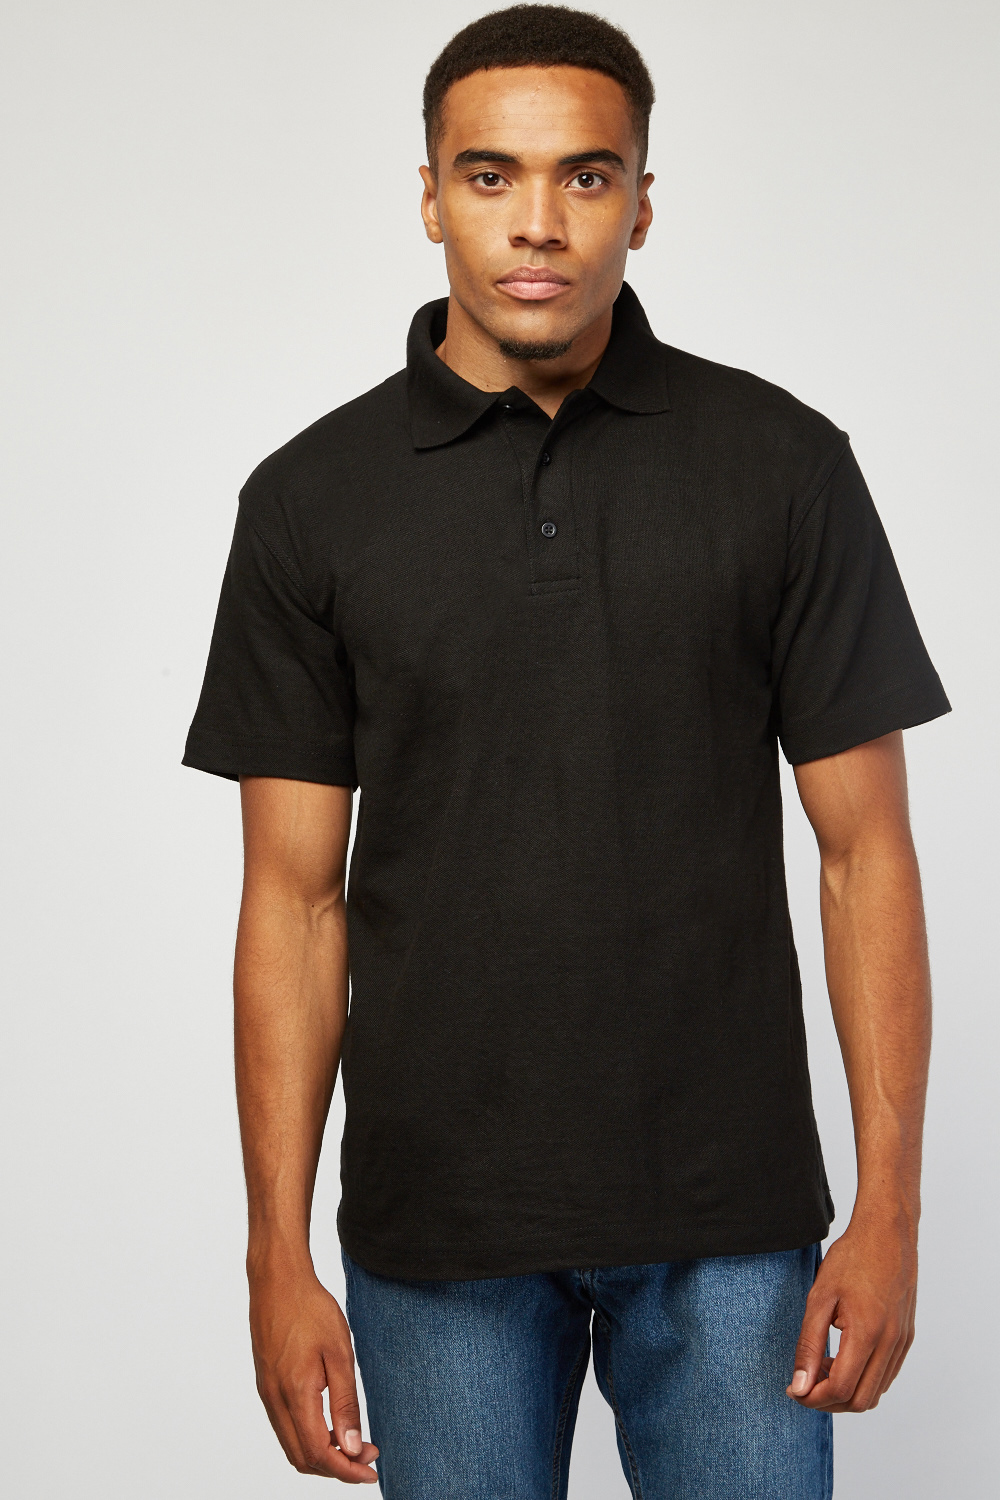 Pack Of 3 Black Polo-Shirts - Just $7